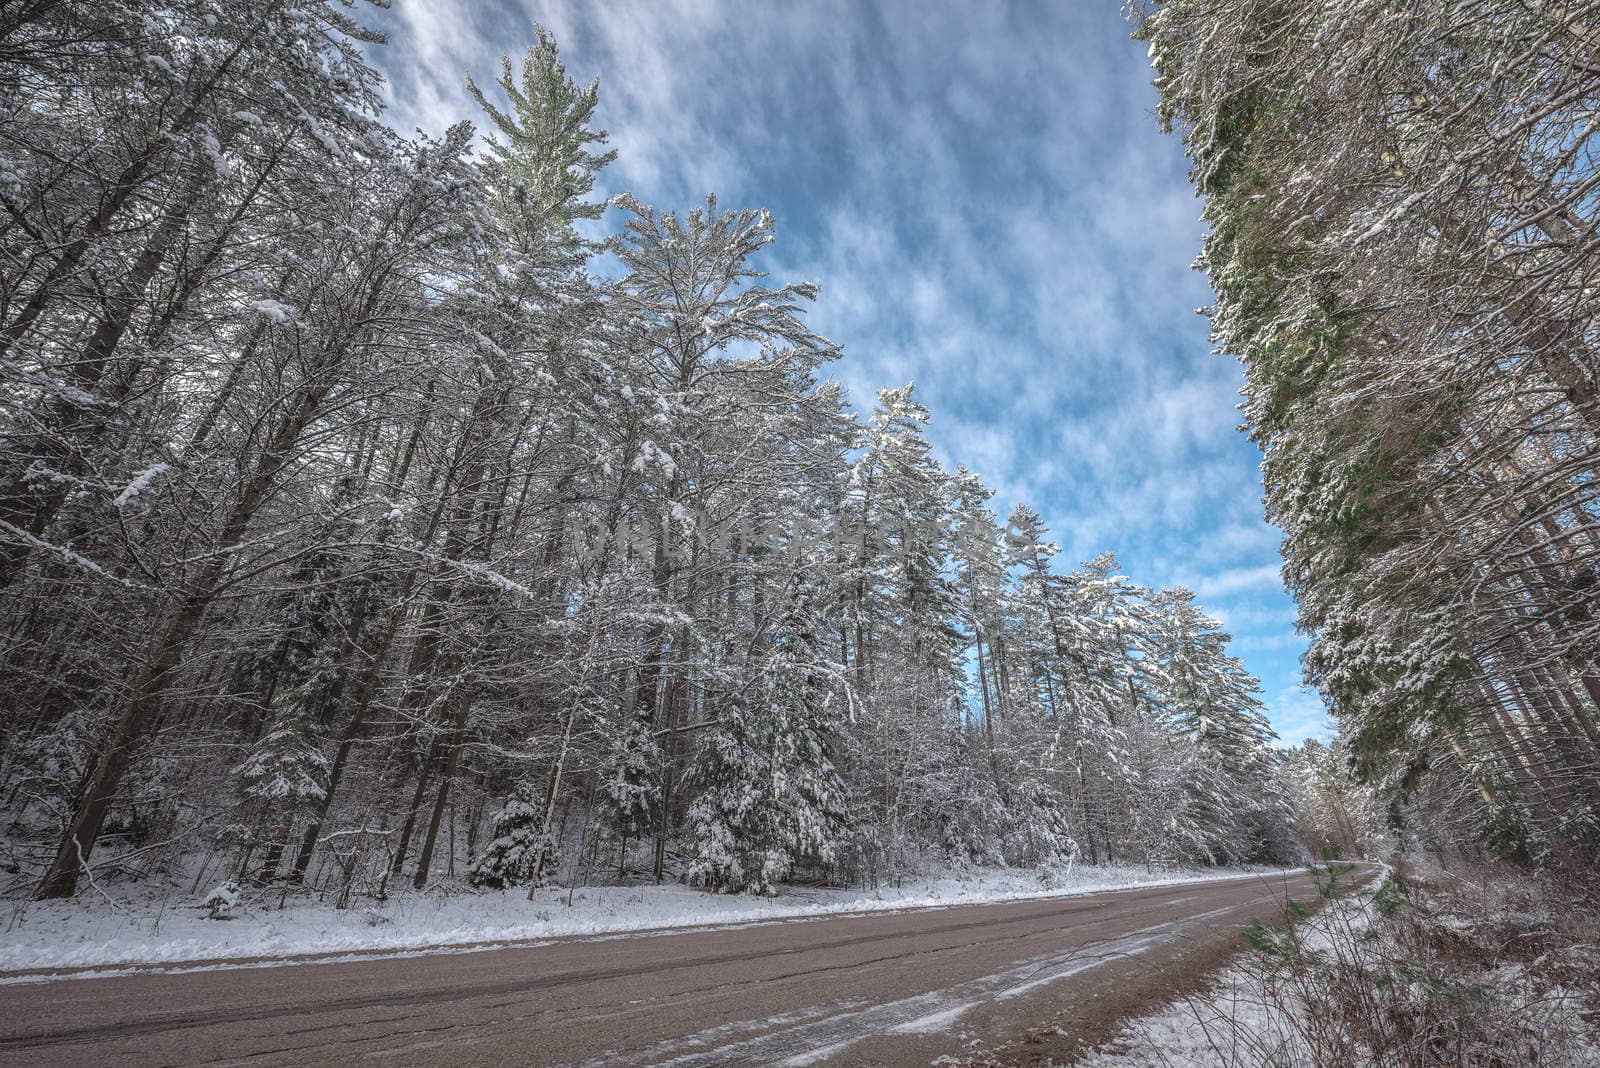 Snow covered pines - beautiful forests along rural roads. by valleyboi63